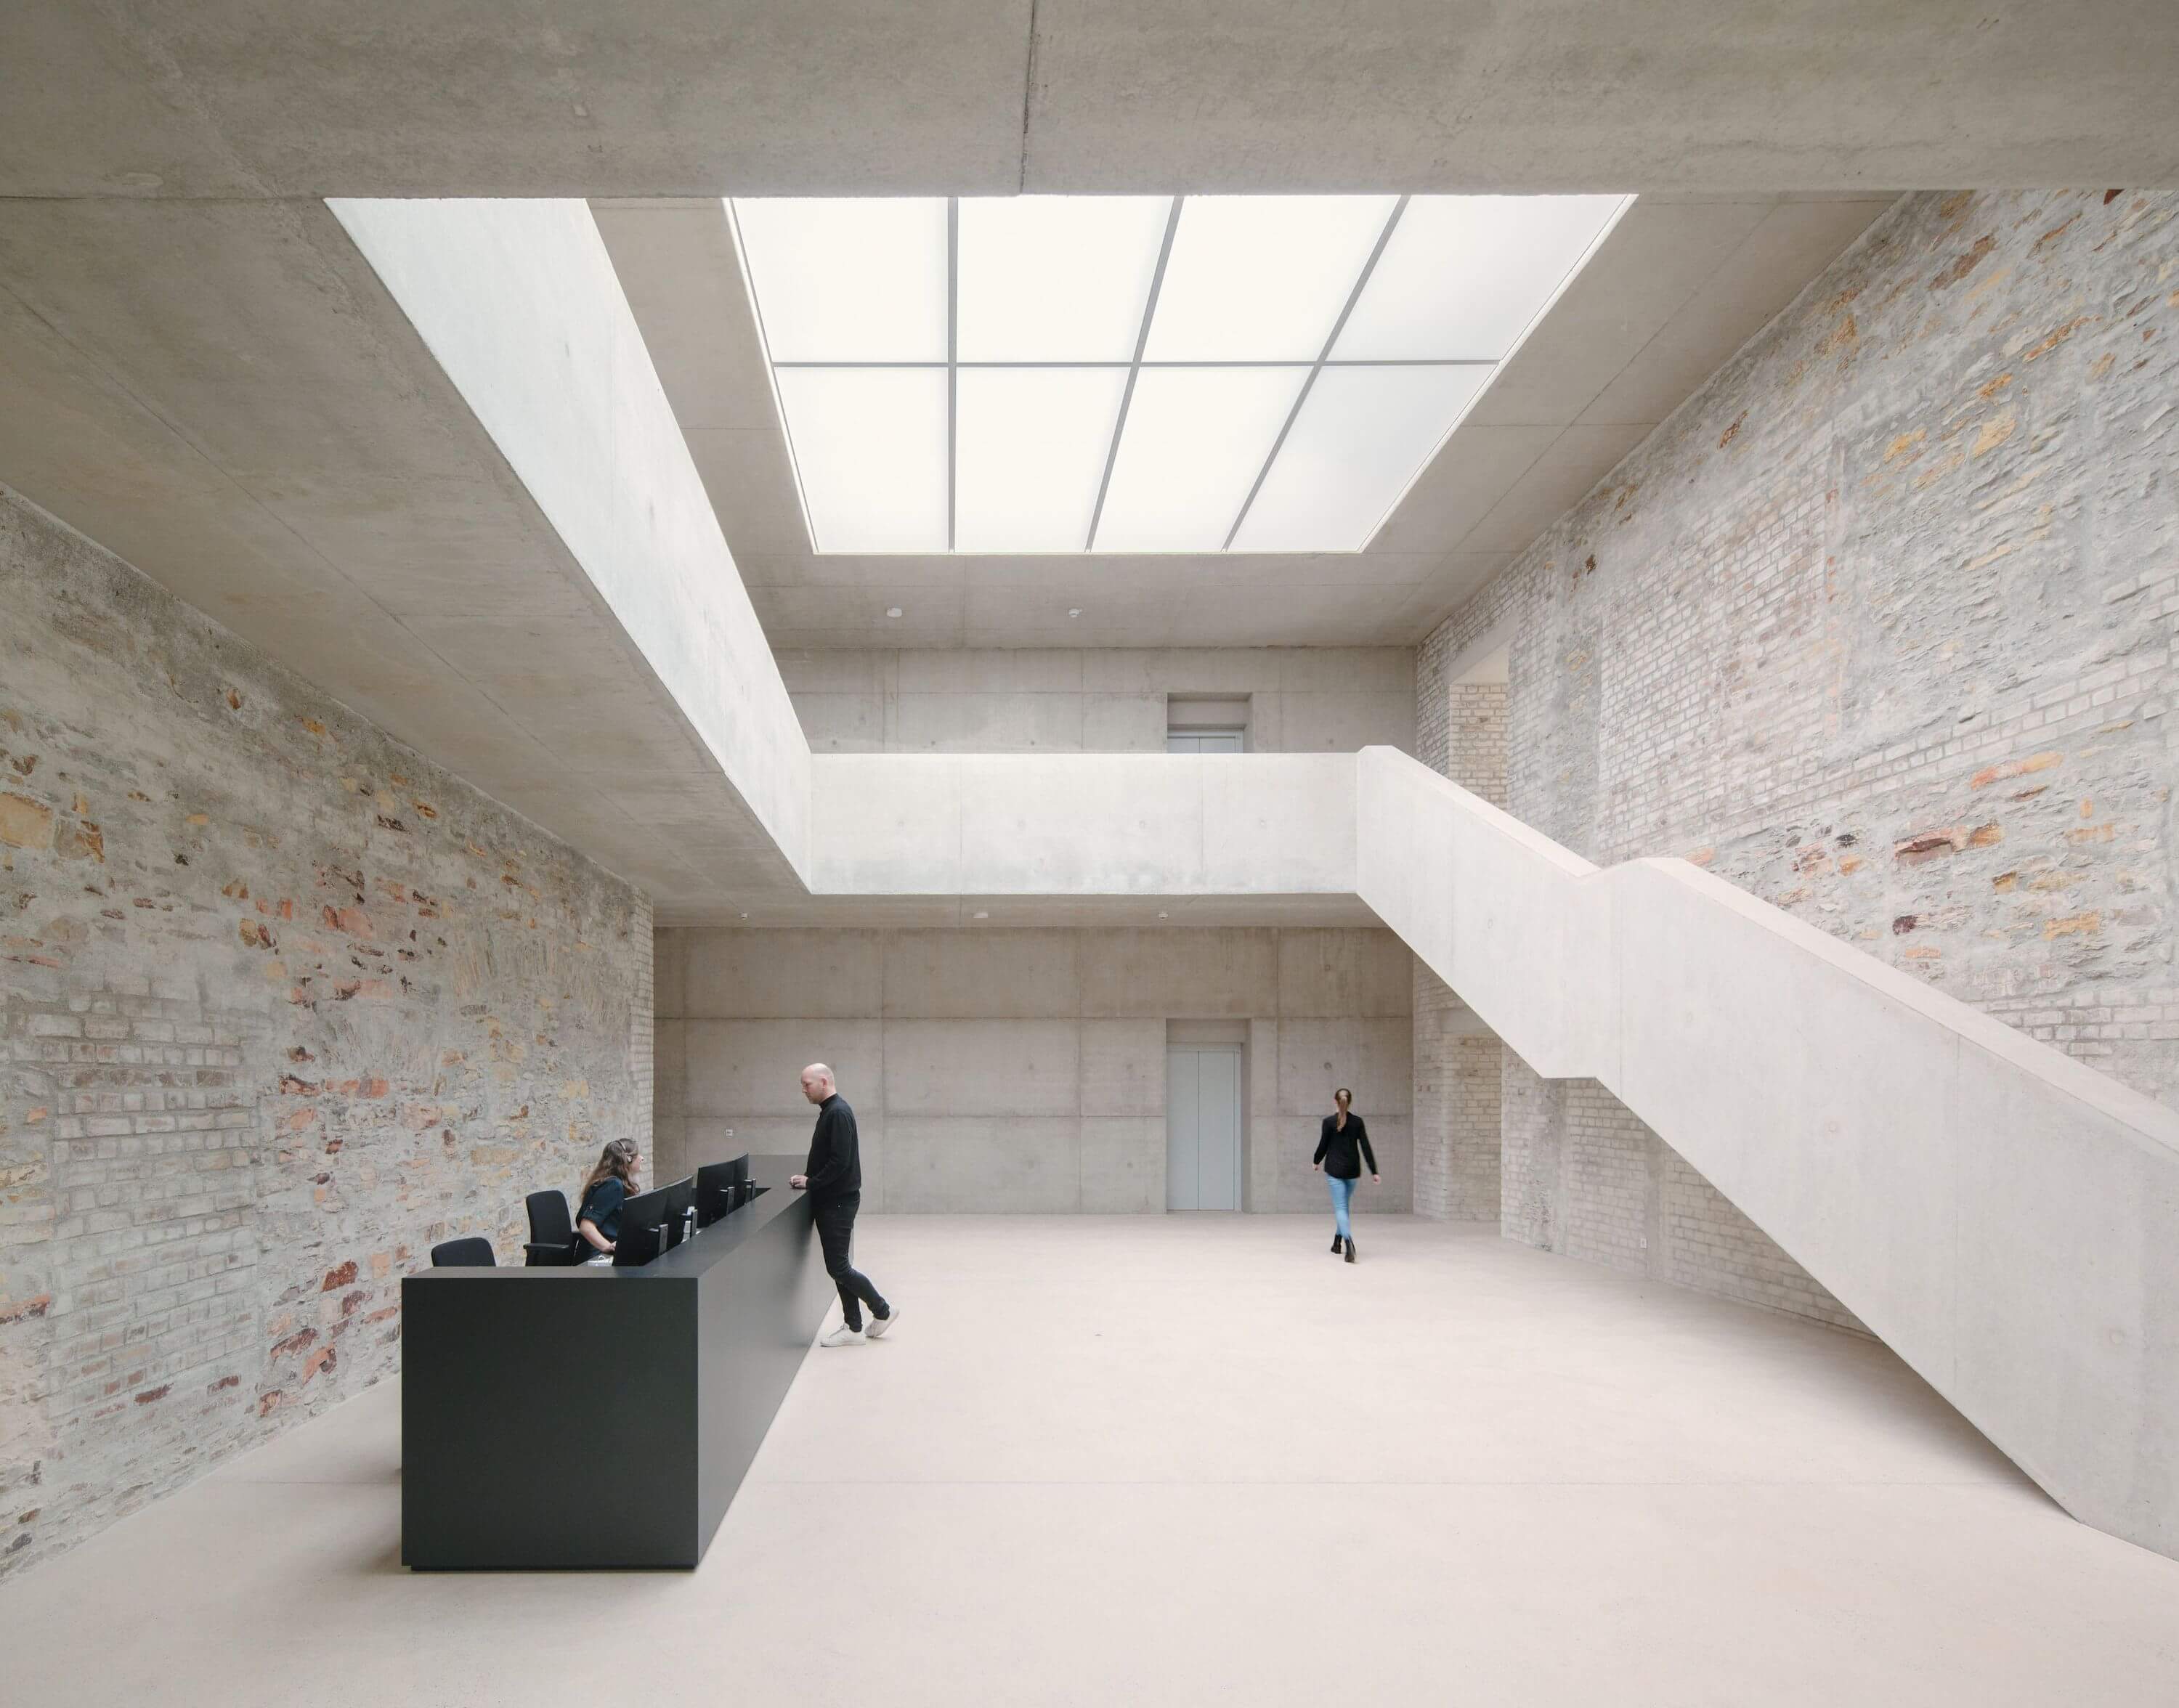 Jacoby Studios Headquarters by David Chipperfield Architects